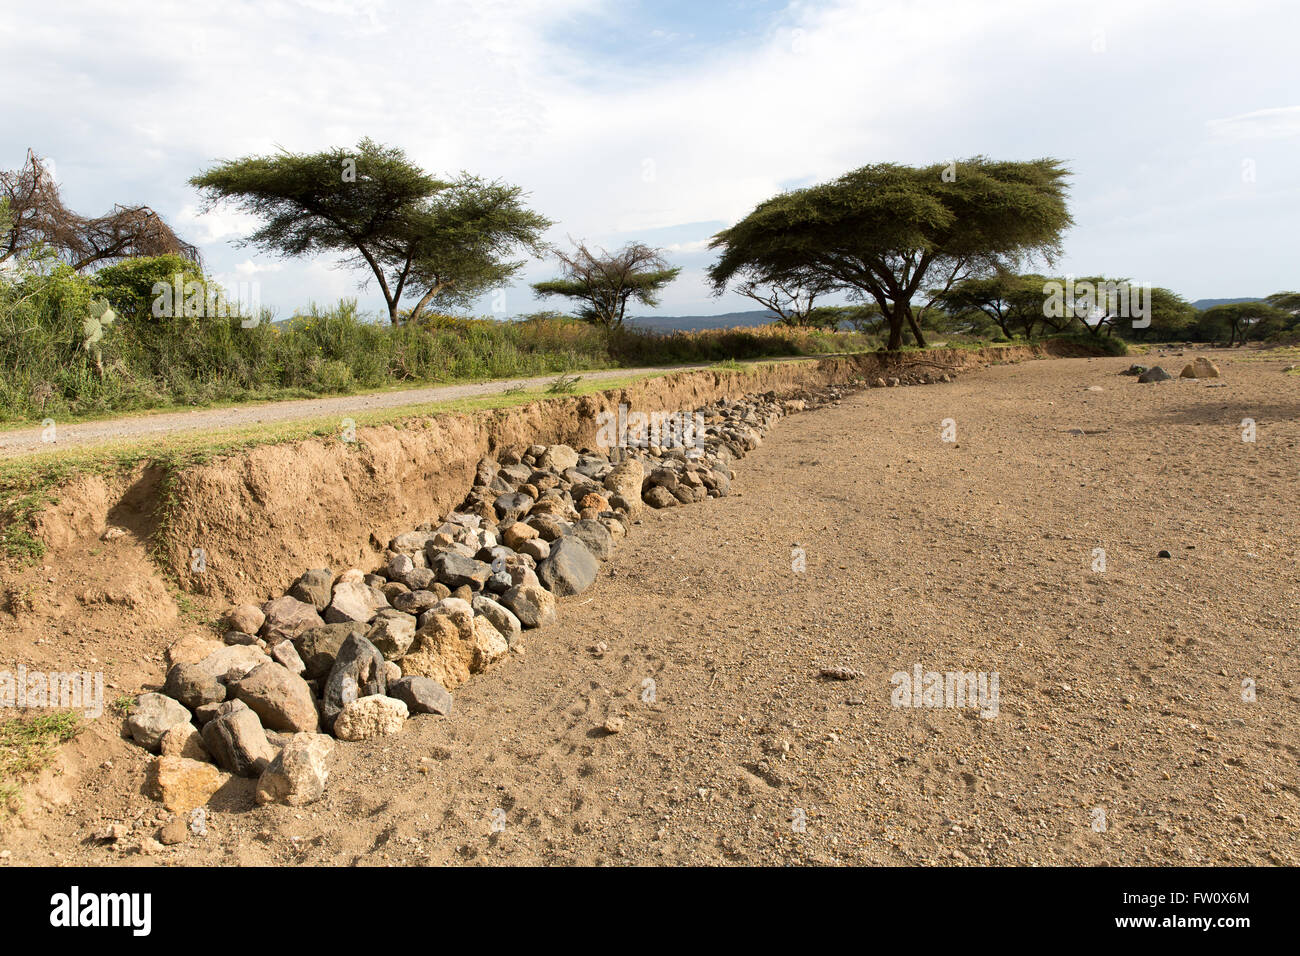 Lake Langano, Ethiopia, October 2013 Alutu Ridge – villagers have stacked stones in the riverbed to protect the road from erosion. Stock Photo